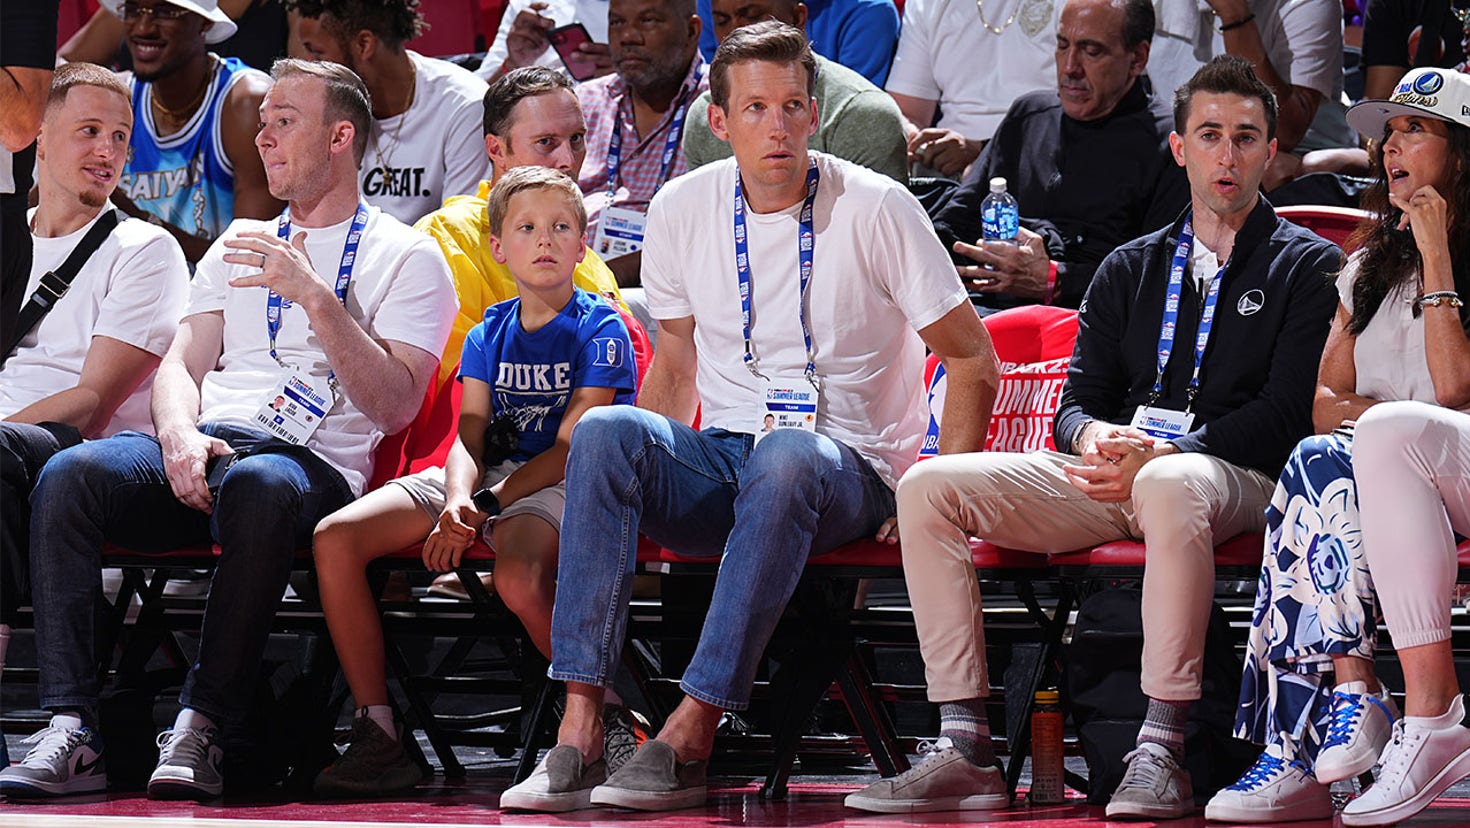 Warriors name Mike Dunleavy Jr as new General Manager